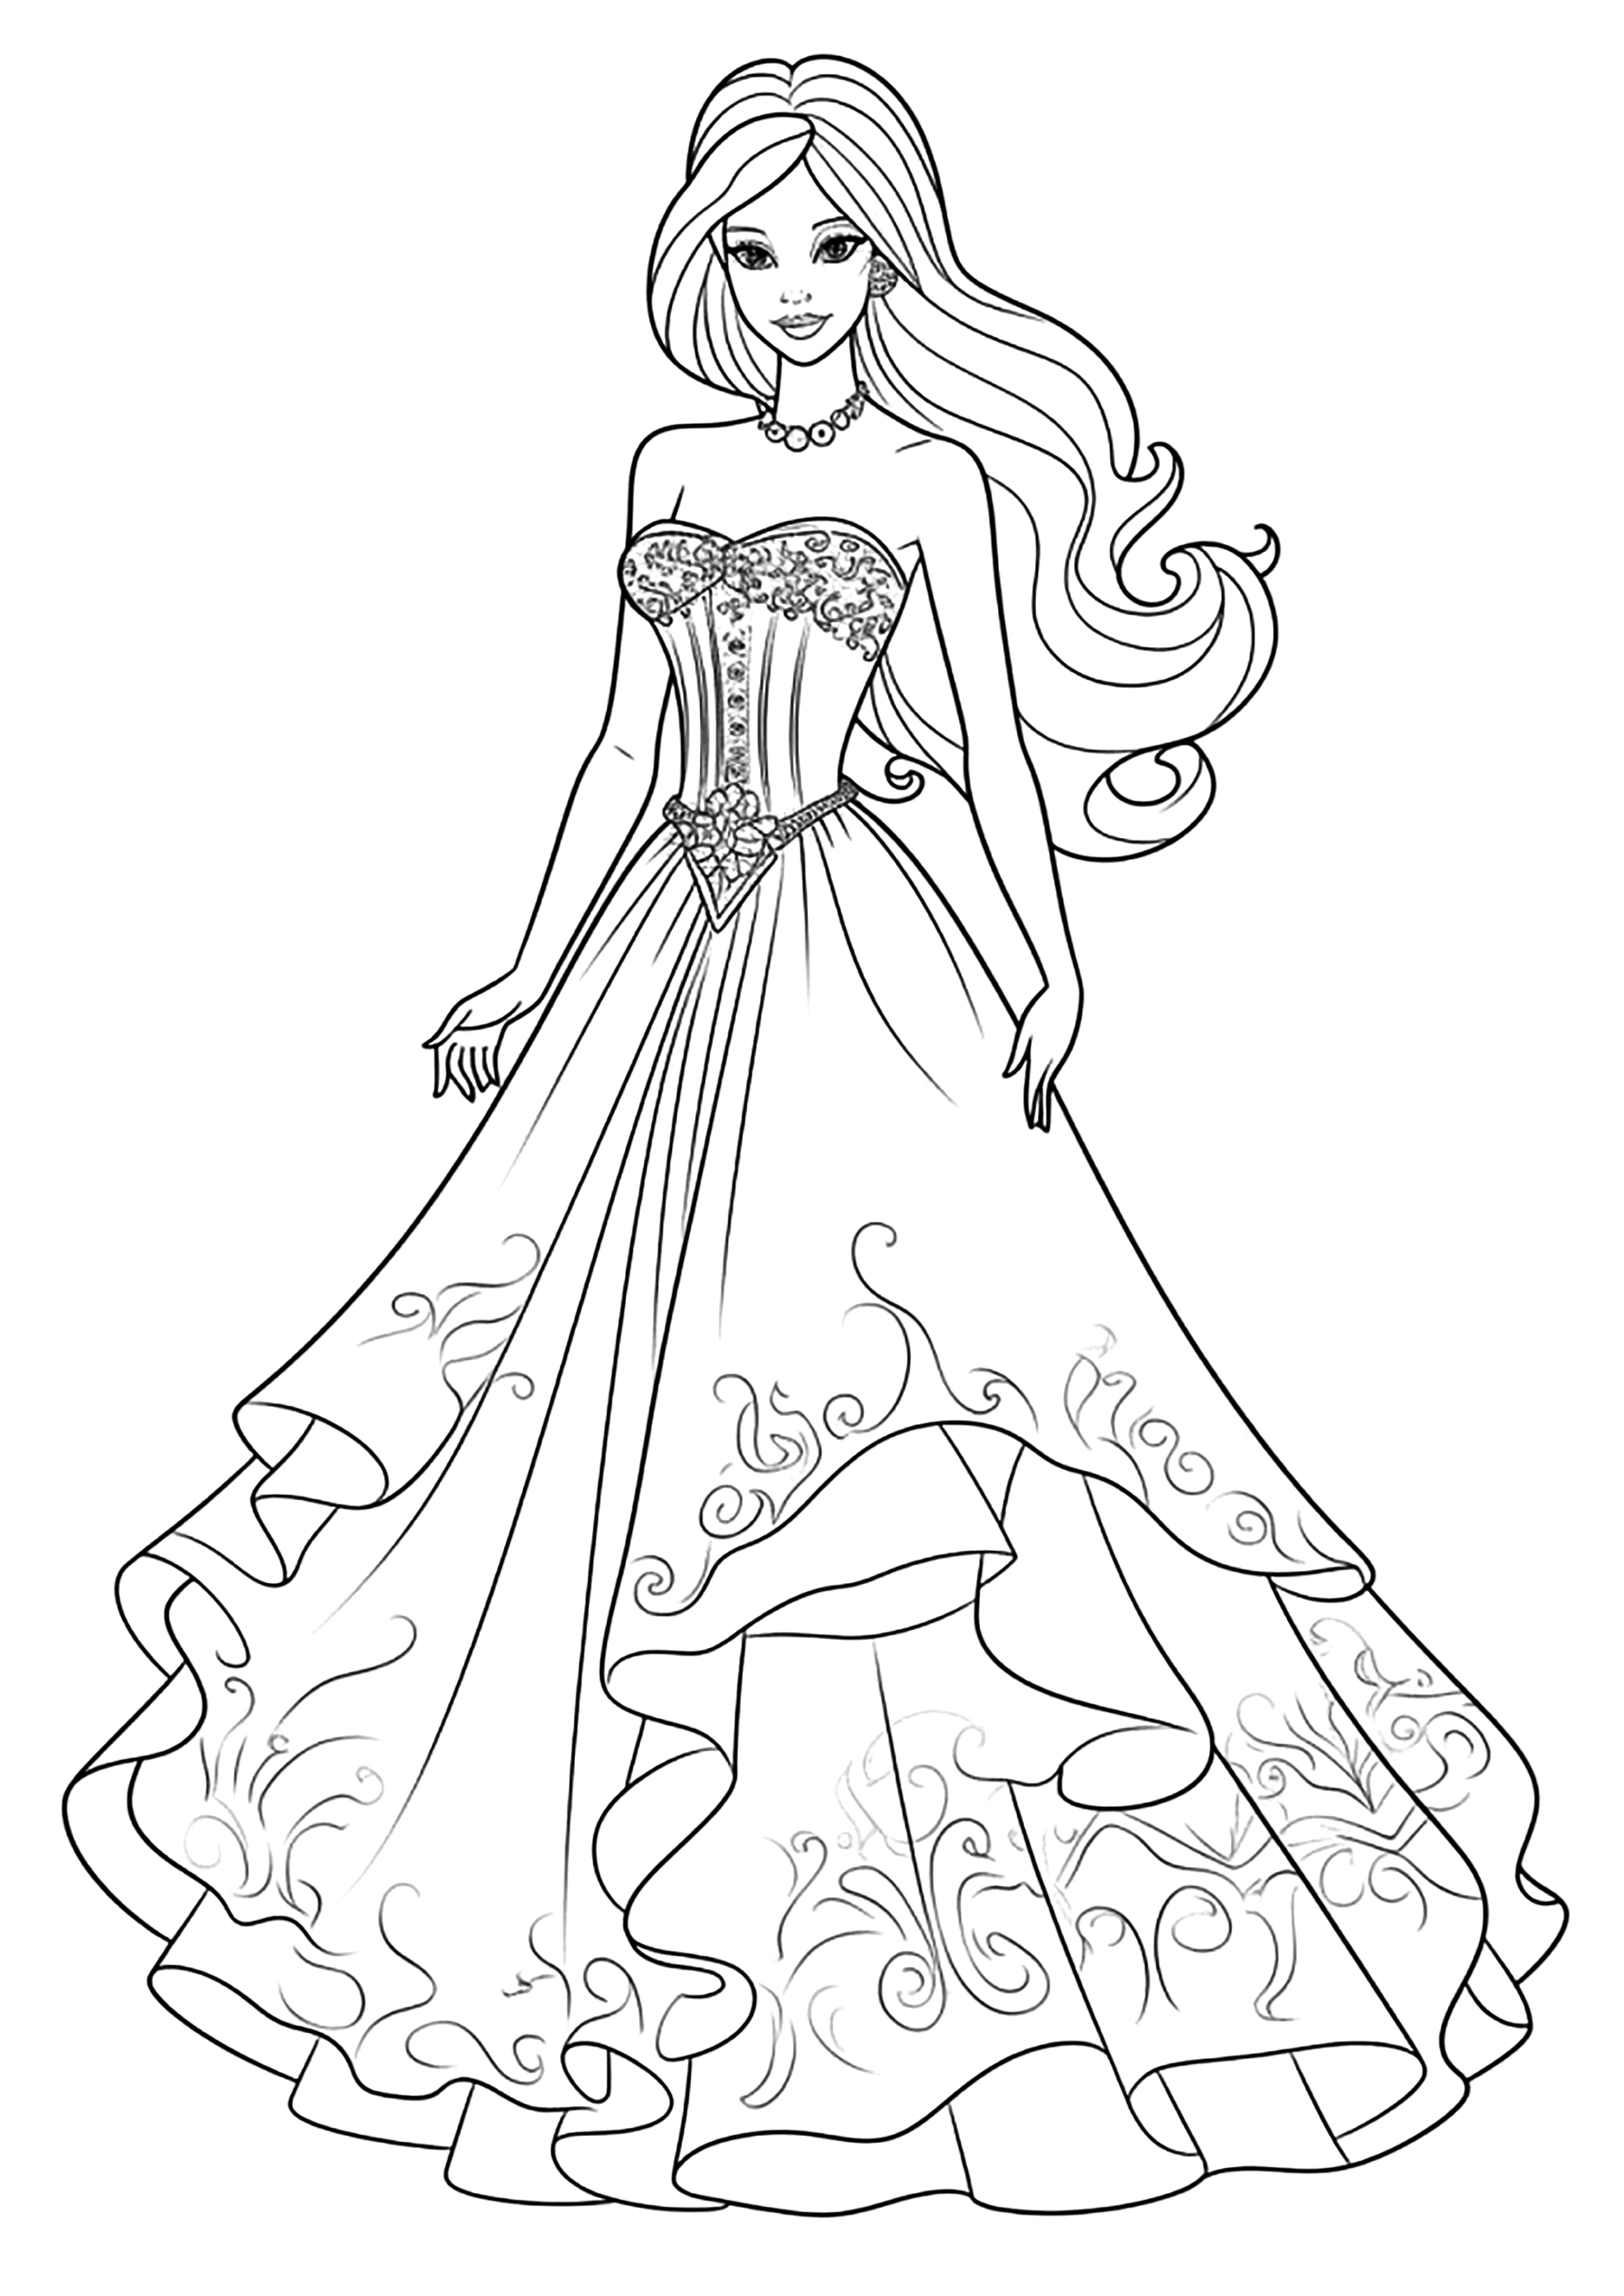 Barbie in a pretty ball gown. Some beautiful details to color in Barbie's pretty dress